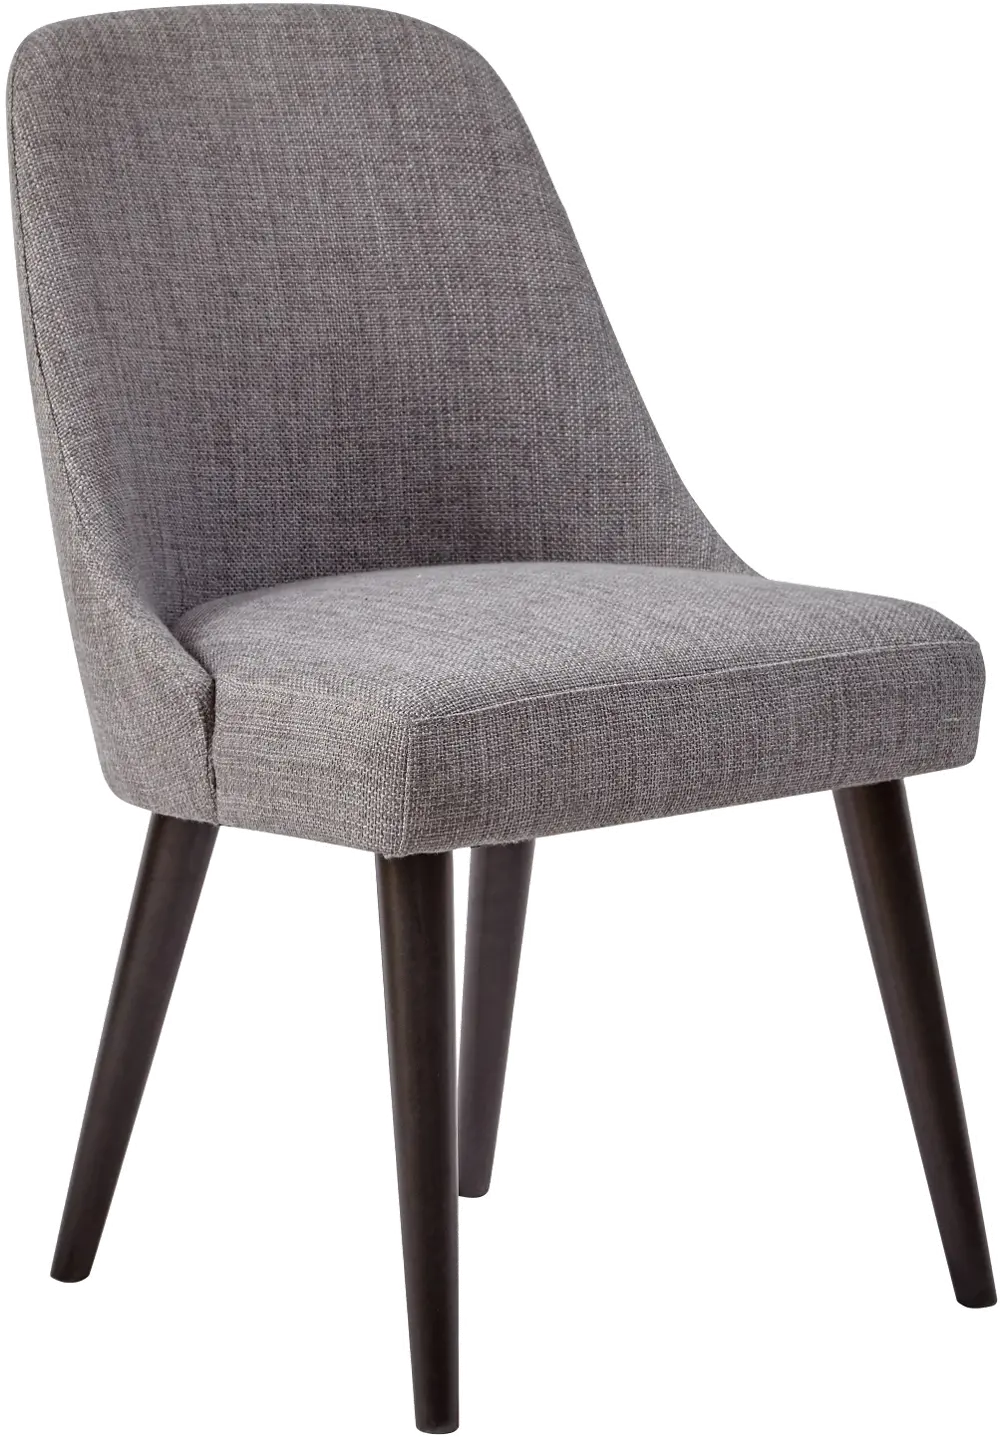 Gray Wash Upholstered Dining Chair - American Retrospective-1